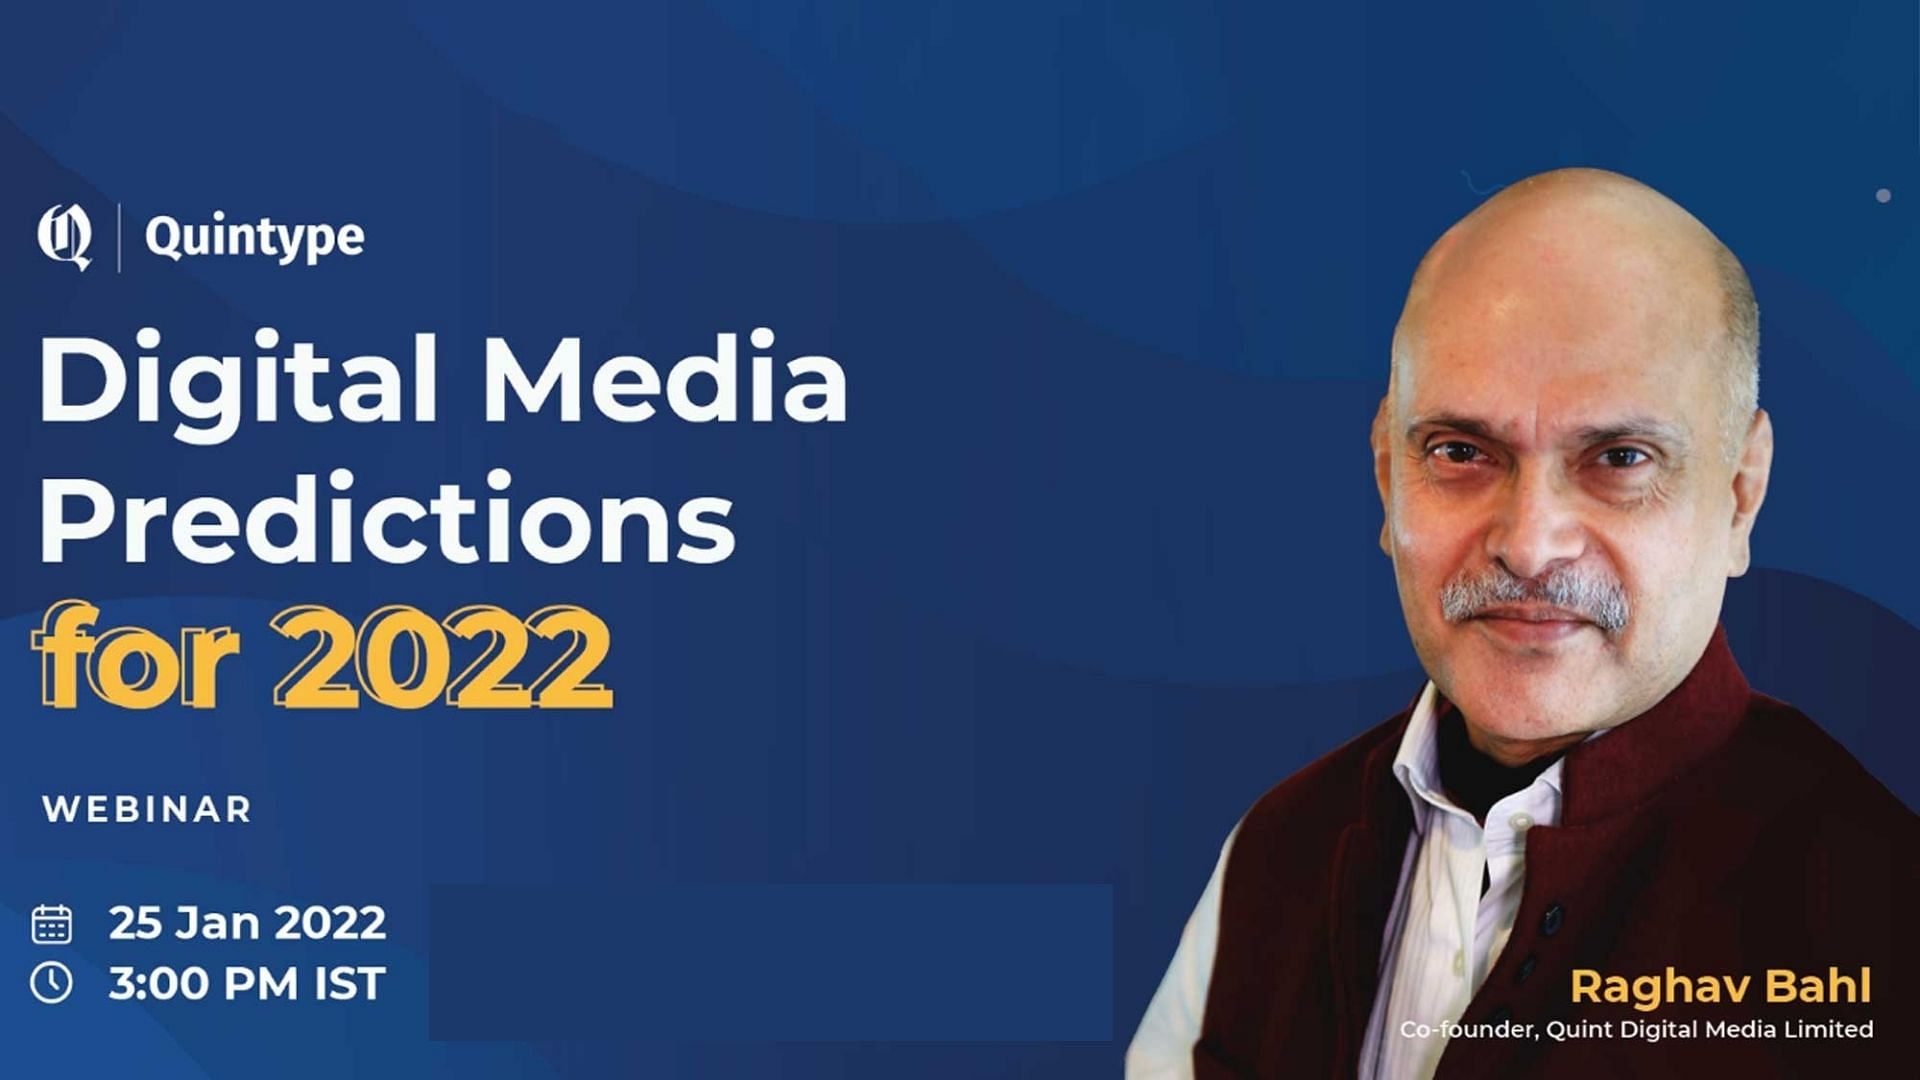 <div class="paragraphs"><p>Quintype is conducting a webinar on “Digital Media Predictions for 2022” with a stellar panel including Raghav Bahl, co-founder at Quint Digital Media limited and Chirdeep Shetty, CEO at Quintype Technologies.</p></div>